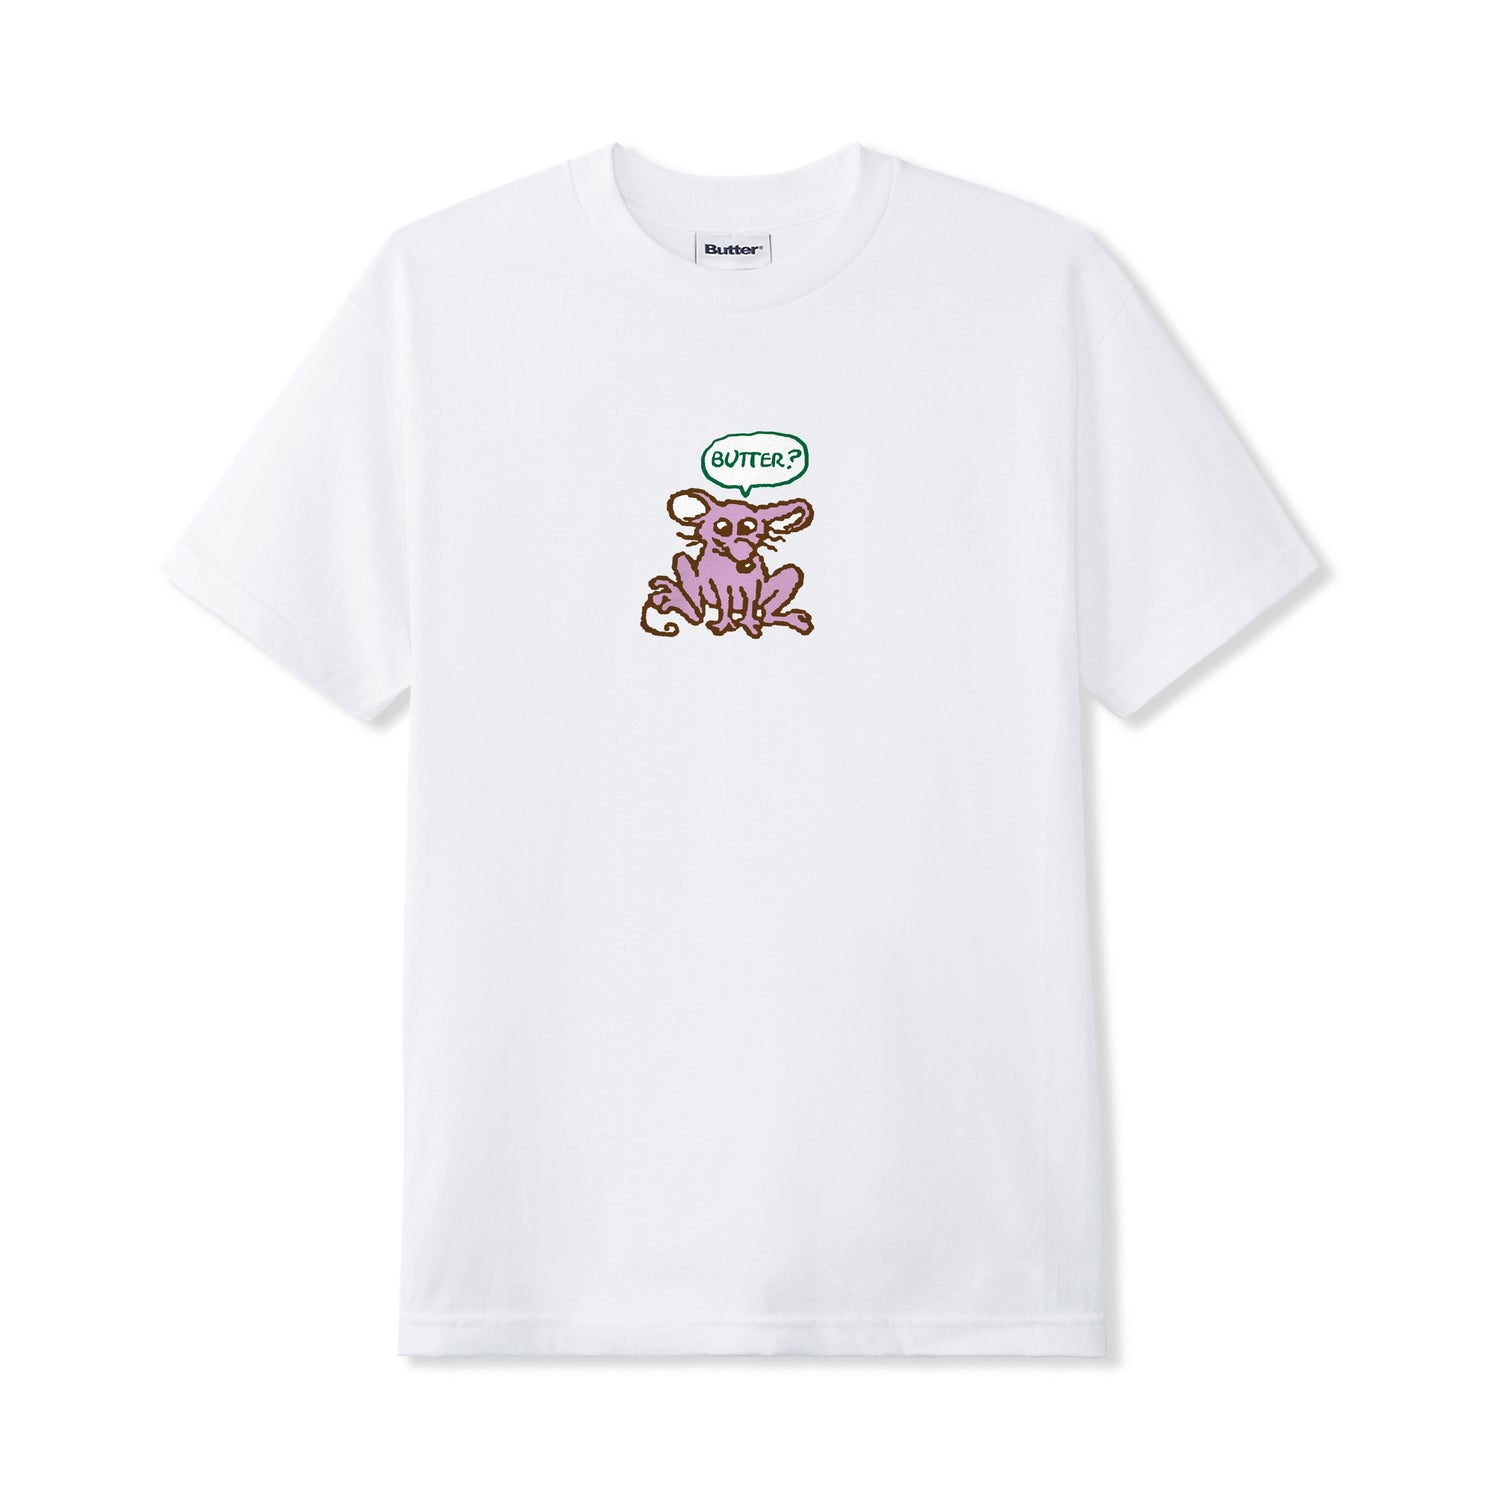 Rodent Tee, White